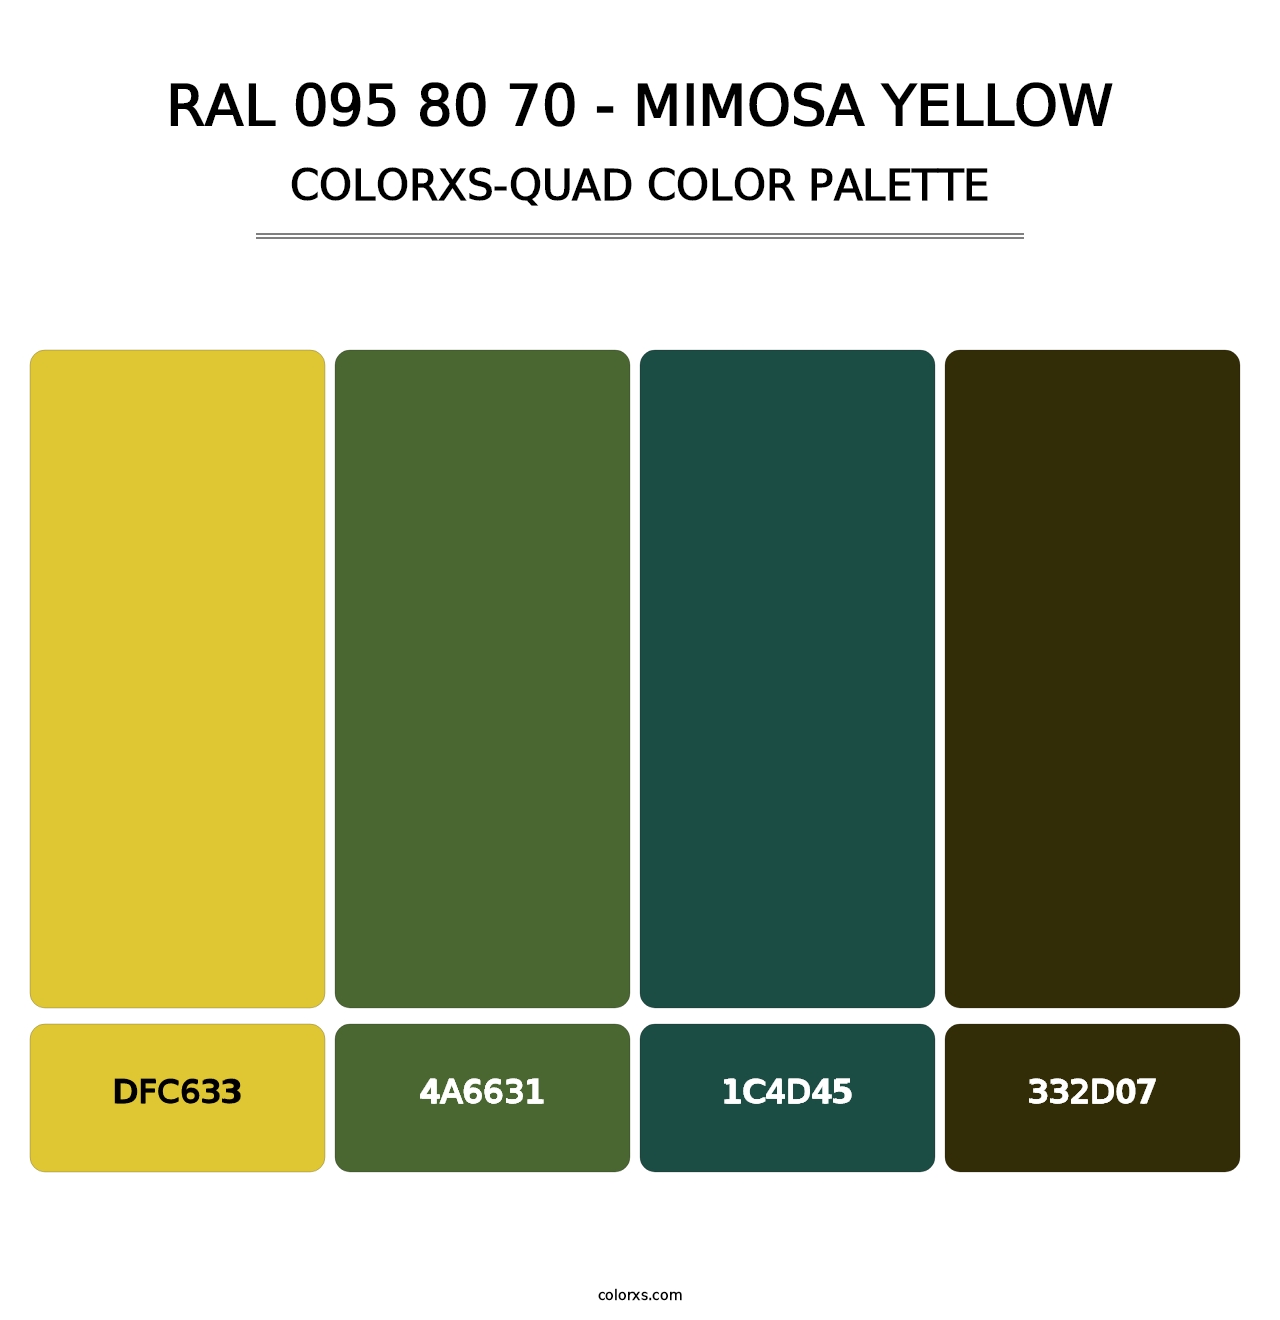 RAL 095 80 70 - Mimosa Yellow - Colorxs Quad Palette